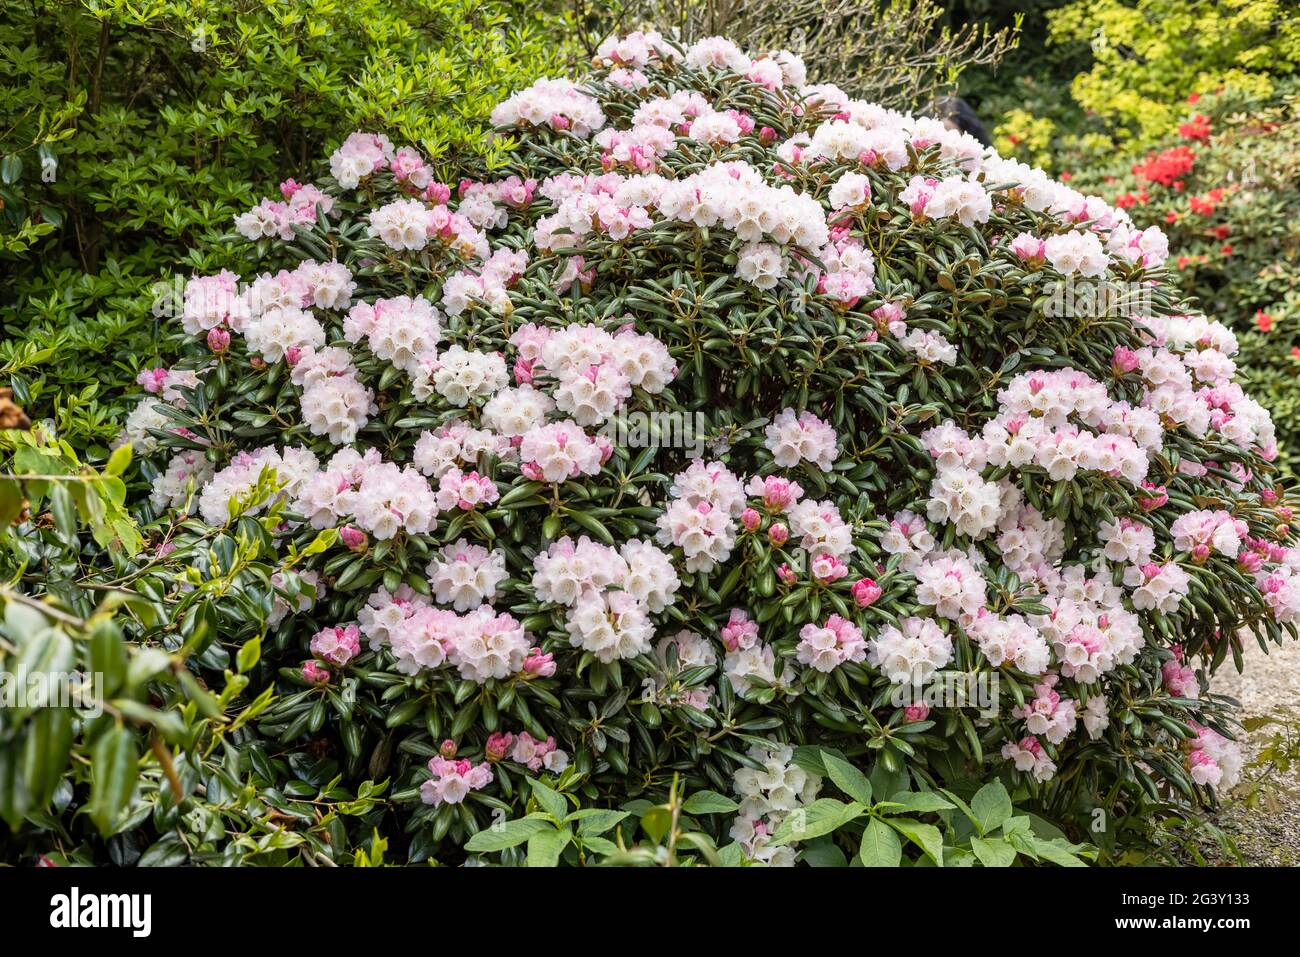 Pale pink flowering rhododendron shrubs in a park. Stock Photo